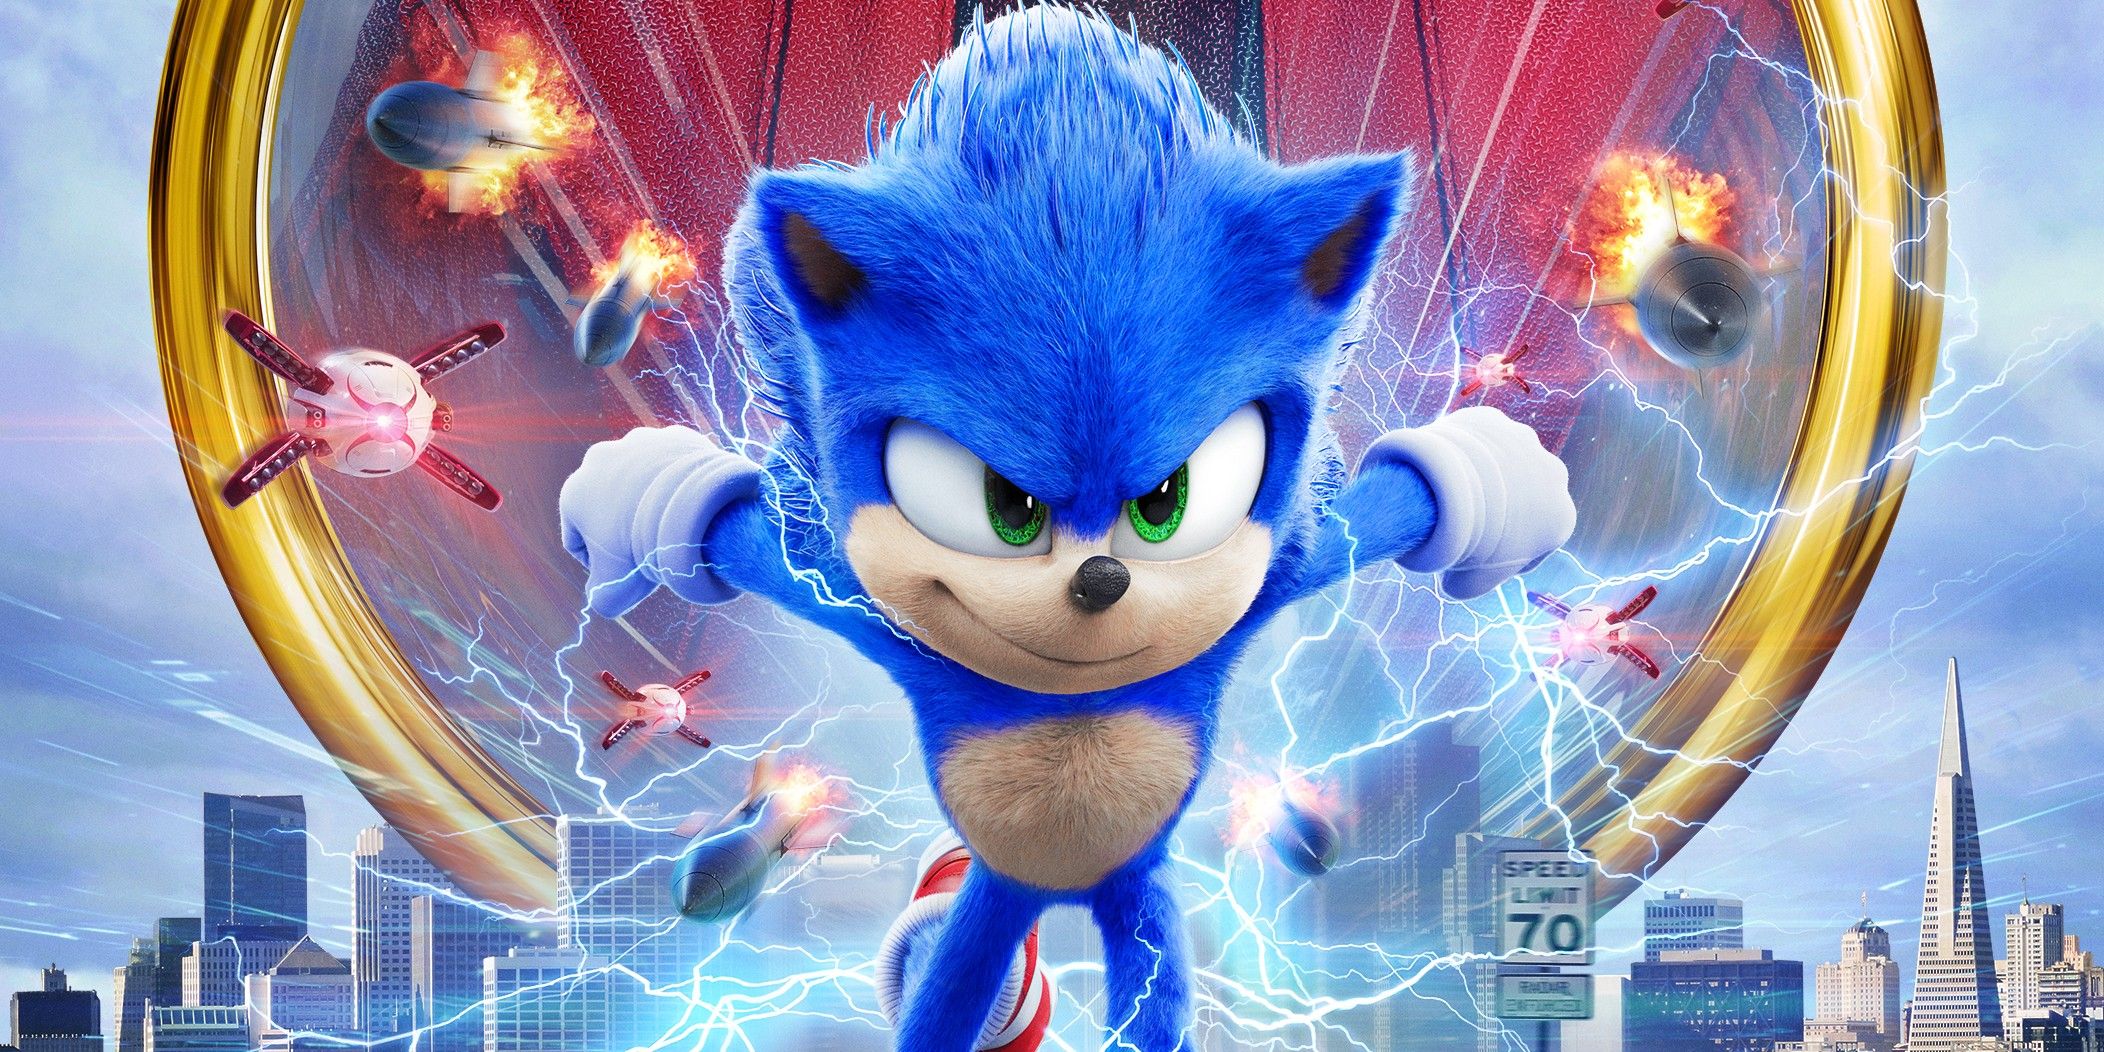 Sonic the Hedgehog 2020 movie redesign header poster